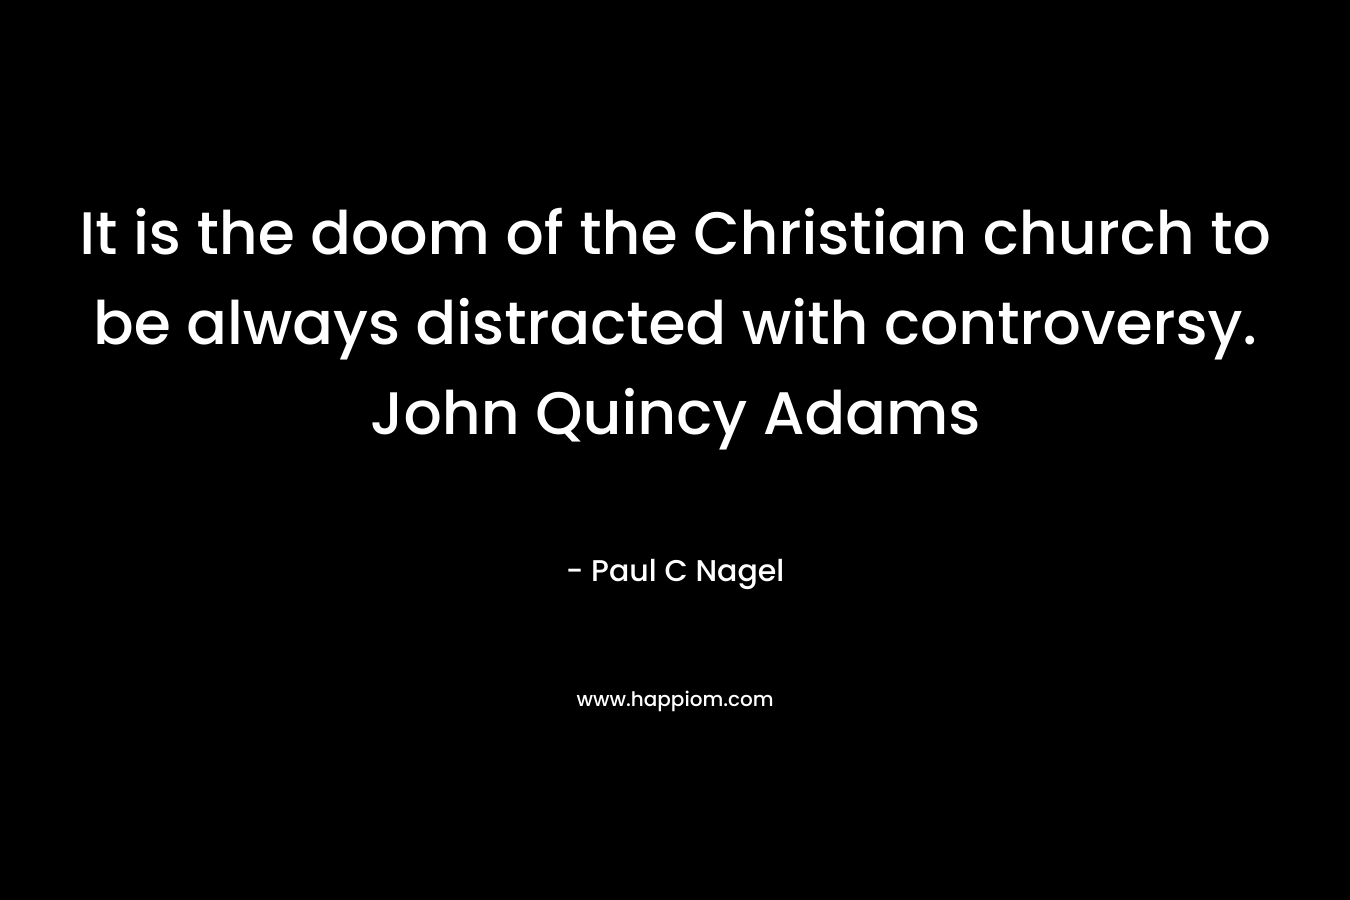 It is the doom of the Christian church to be always distracted with controversy. John Quincy Adams